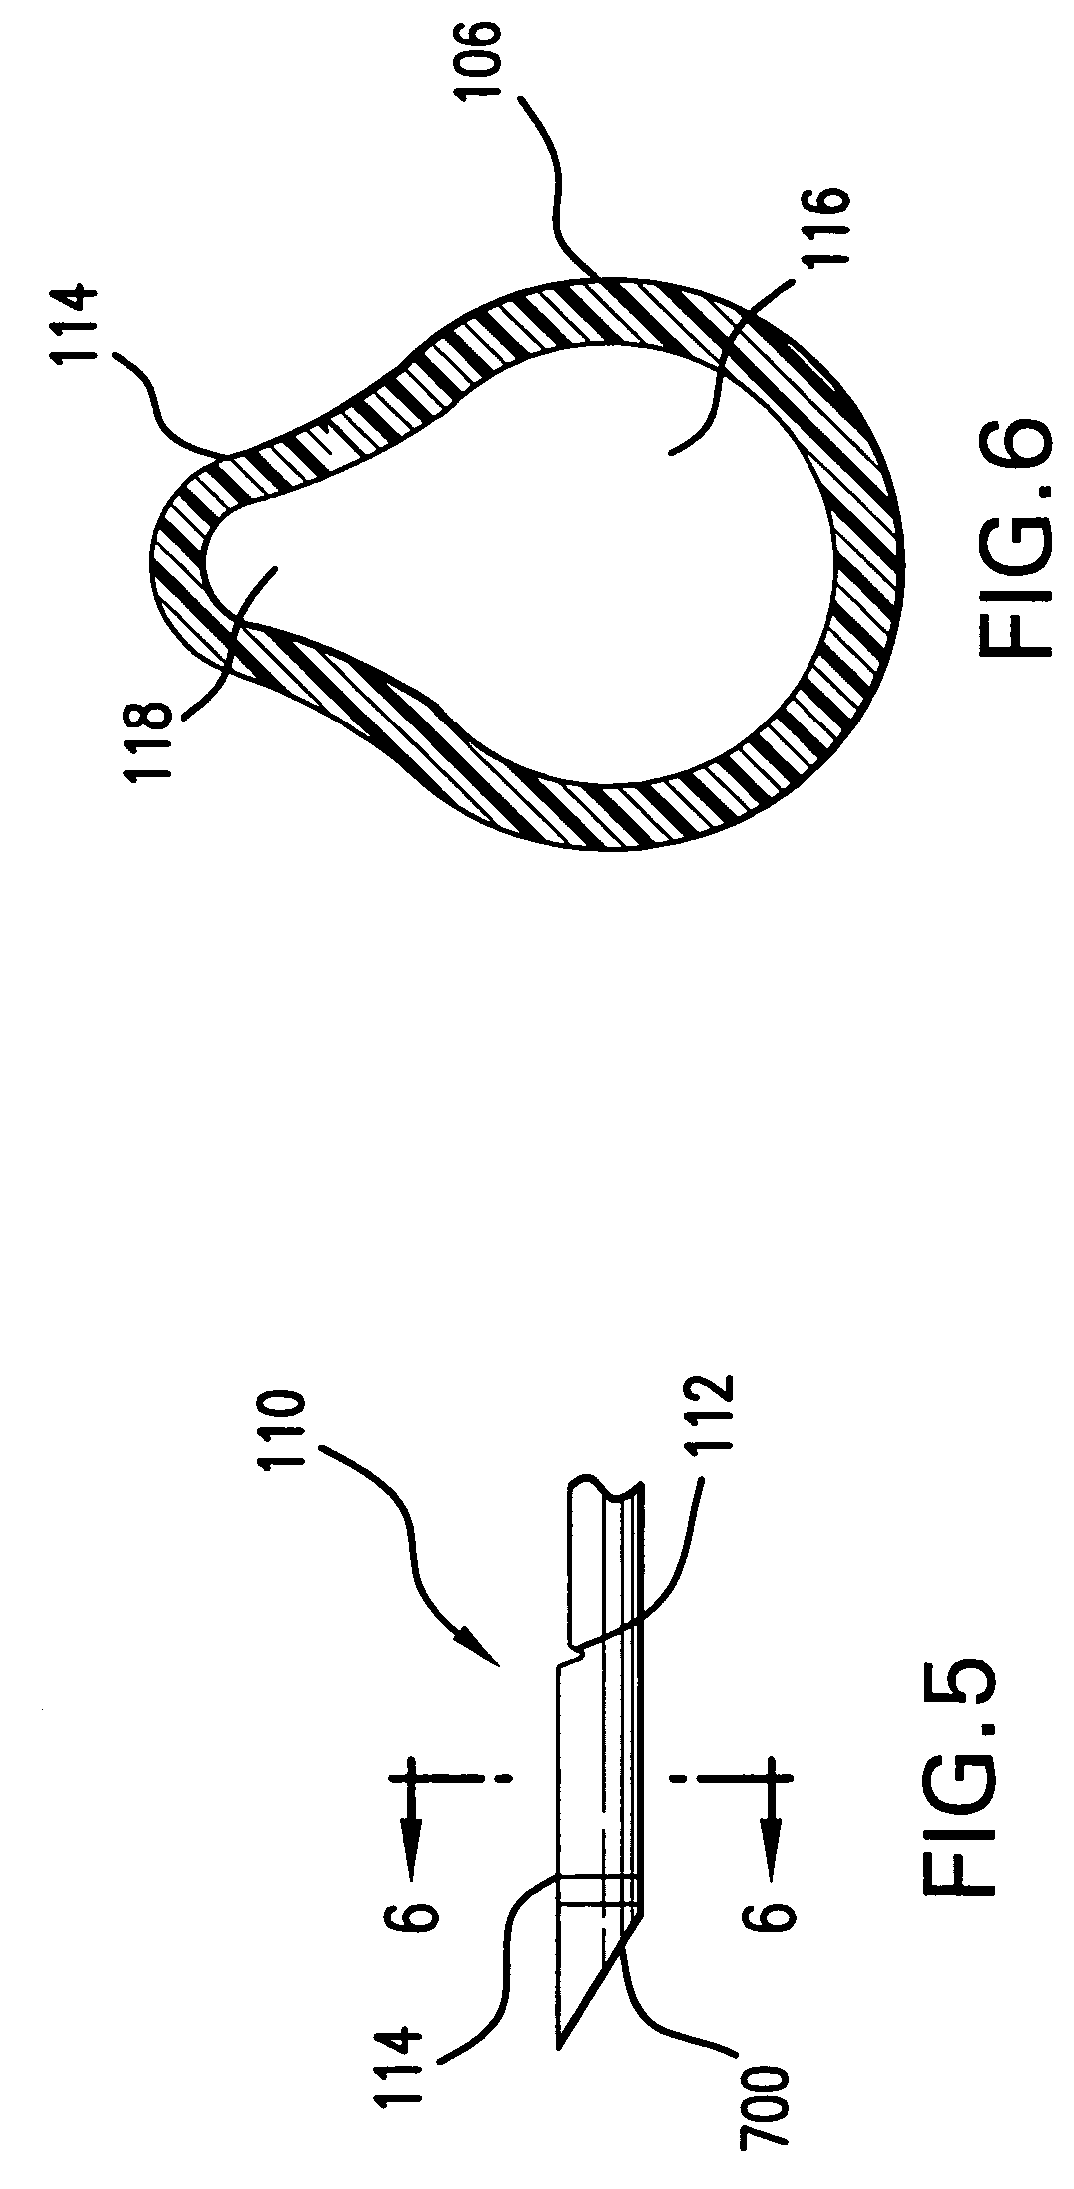 Aspiration catheter with tracking portion